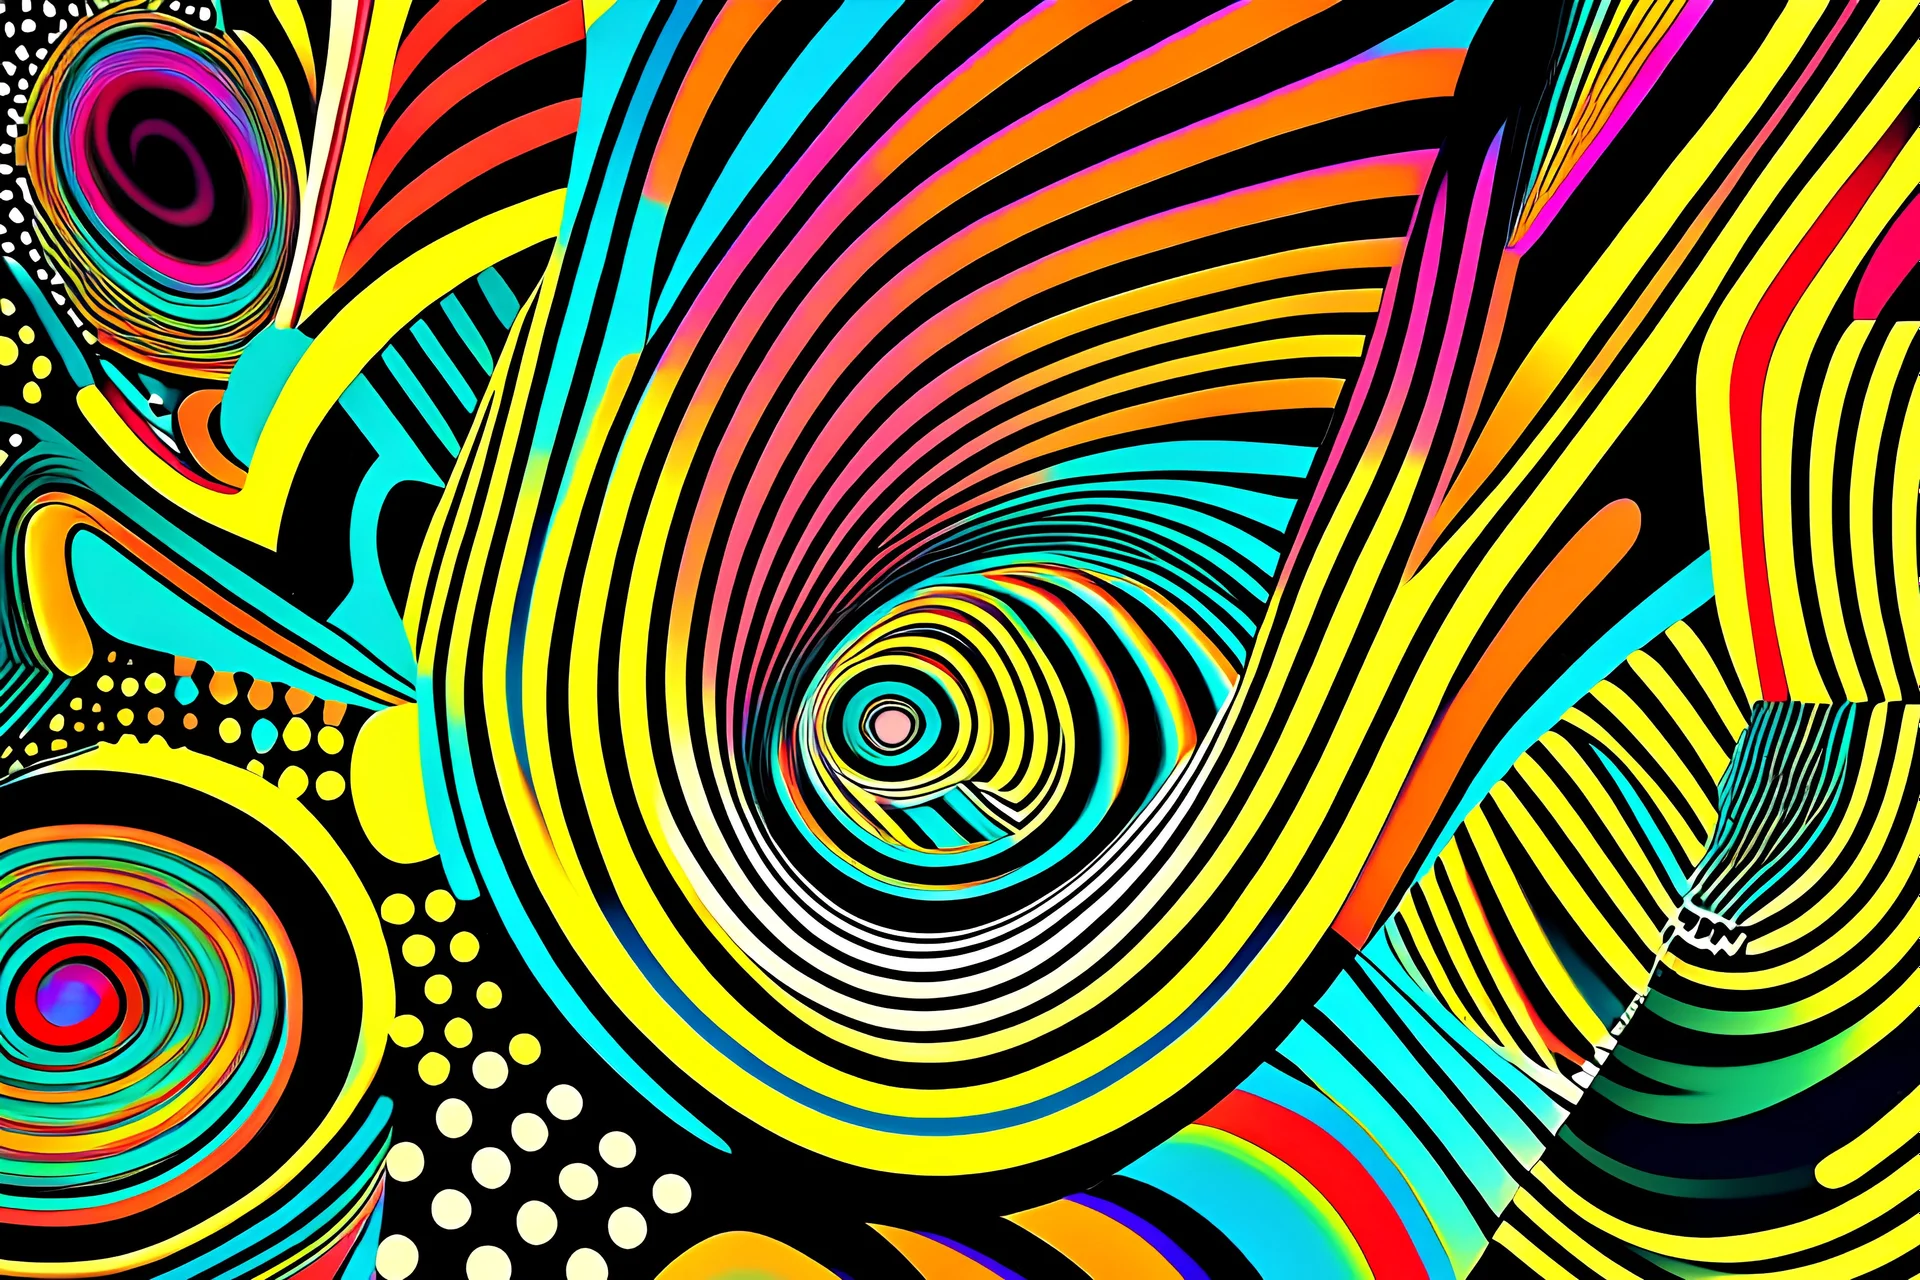 A futuristic digital artwork featuring vibrant colors and dynamic patterns inspired by the genre of techno acid music. The image showcases abstract shapes, pulsating lines, and swirling textures, creating a visually striking representation of the energetic and hypnotic sound. Influenced by artists such as Salvador Dali, Yayoi Kusama, and Bridget Riley.